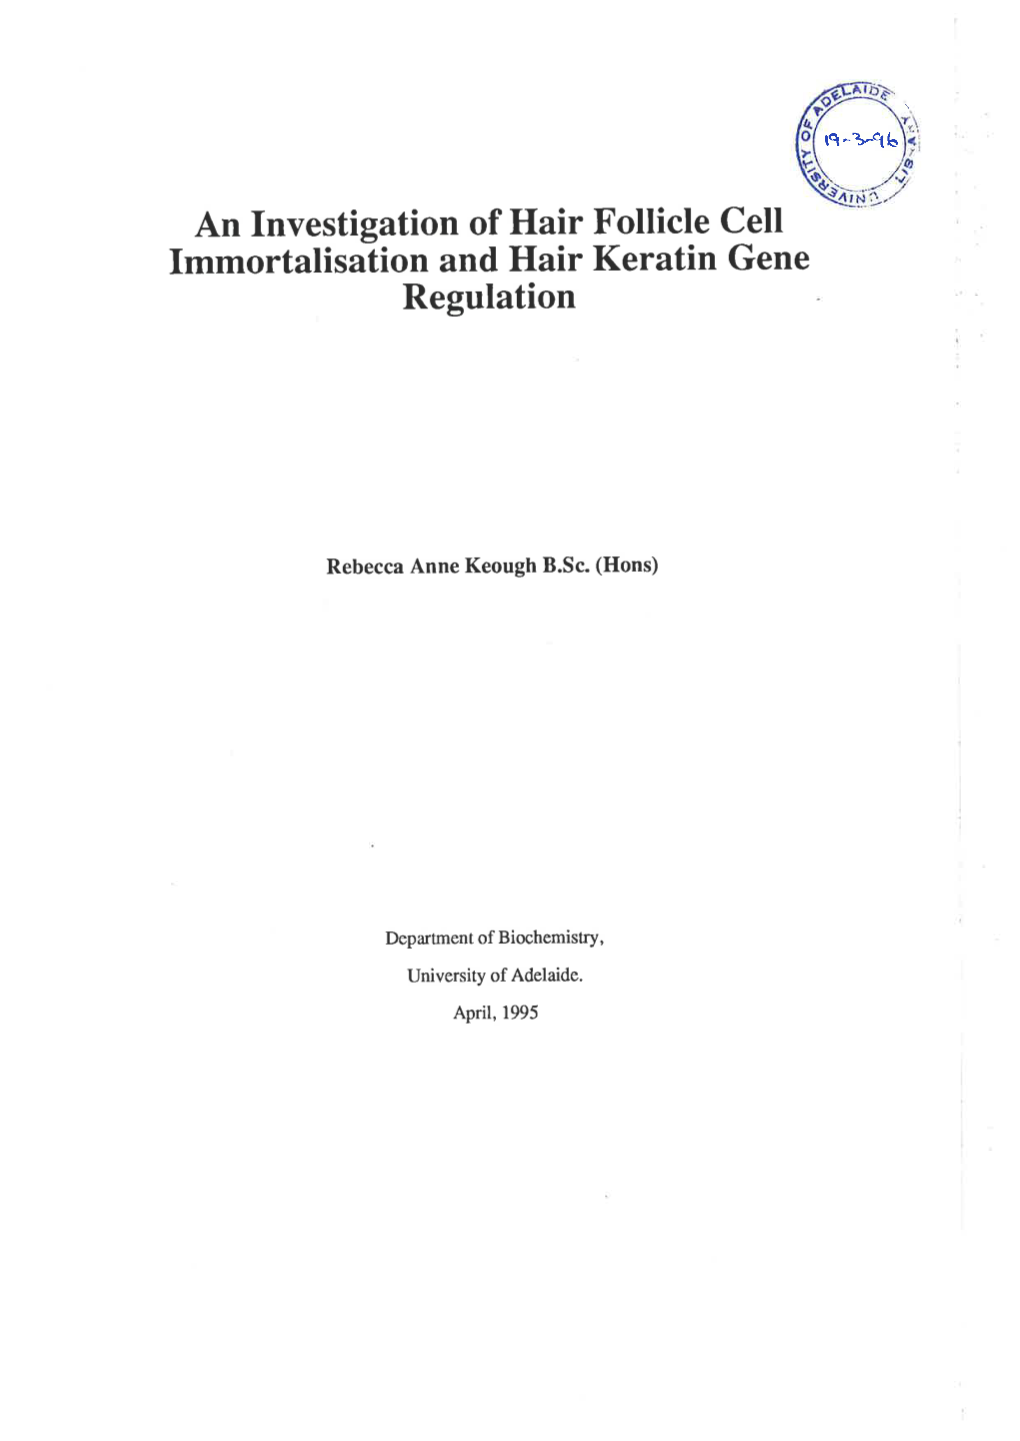 An Investigation of Hair Follicle Cell Immortalisation and Hair Keratin Gene Regulation